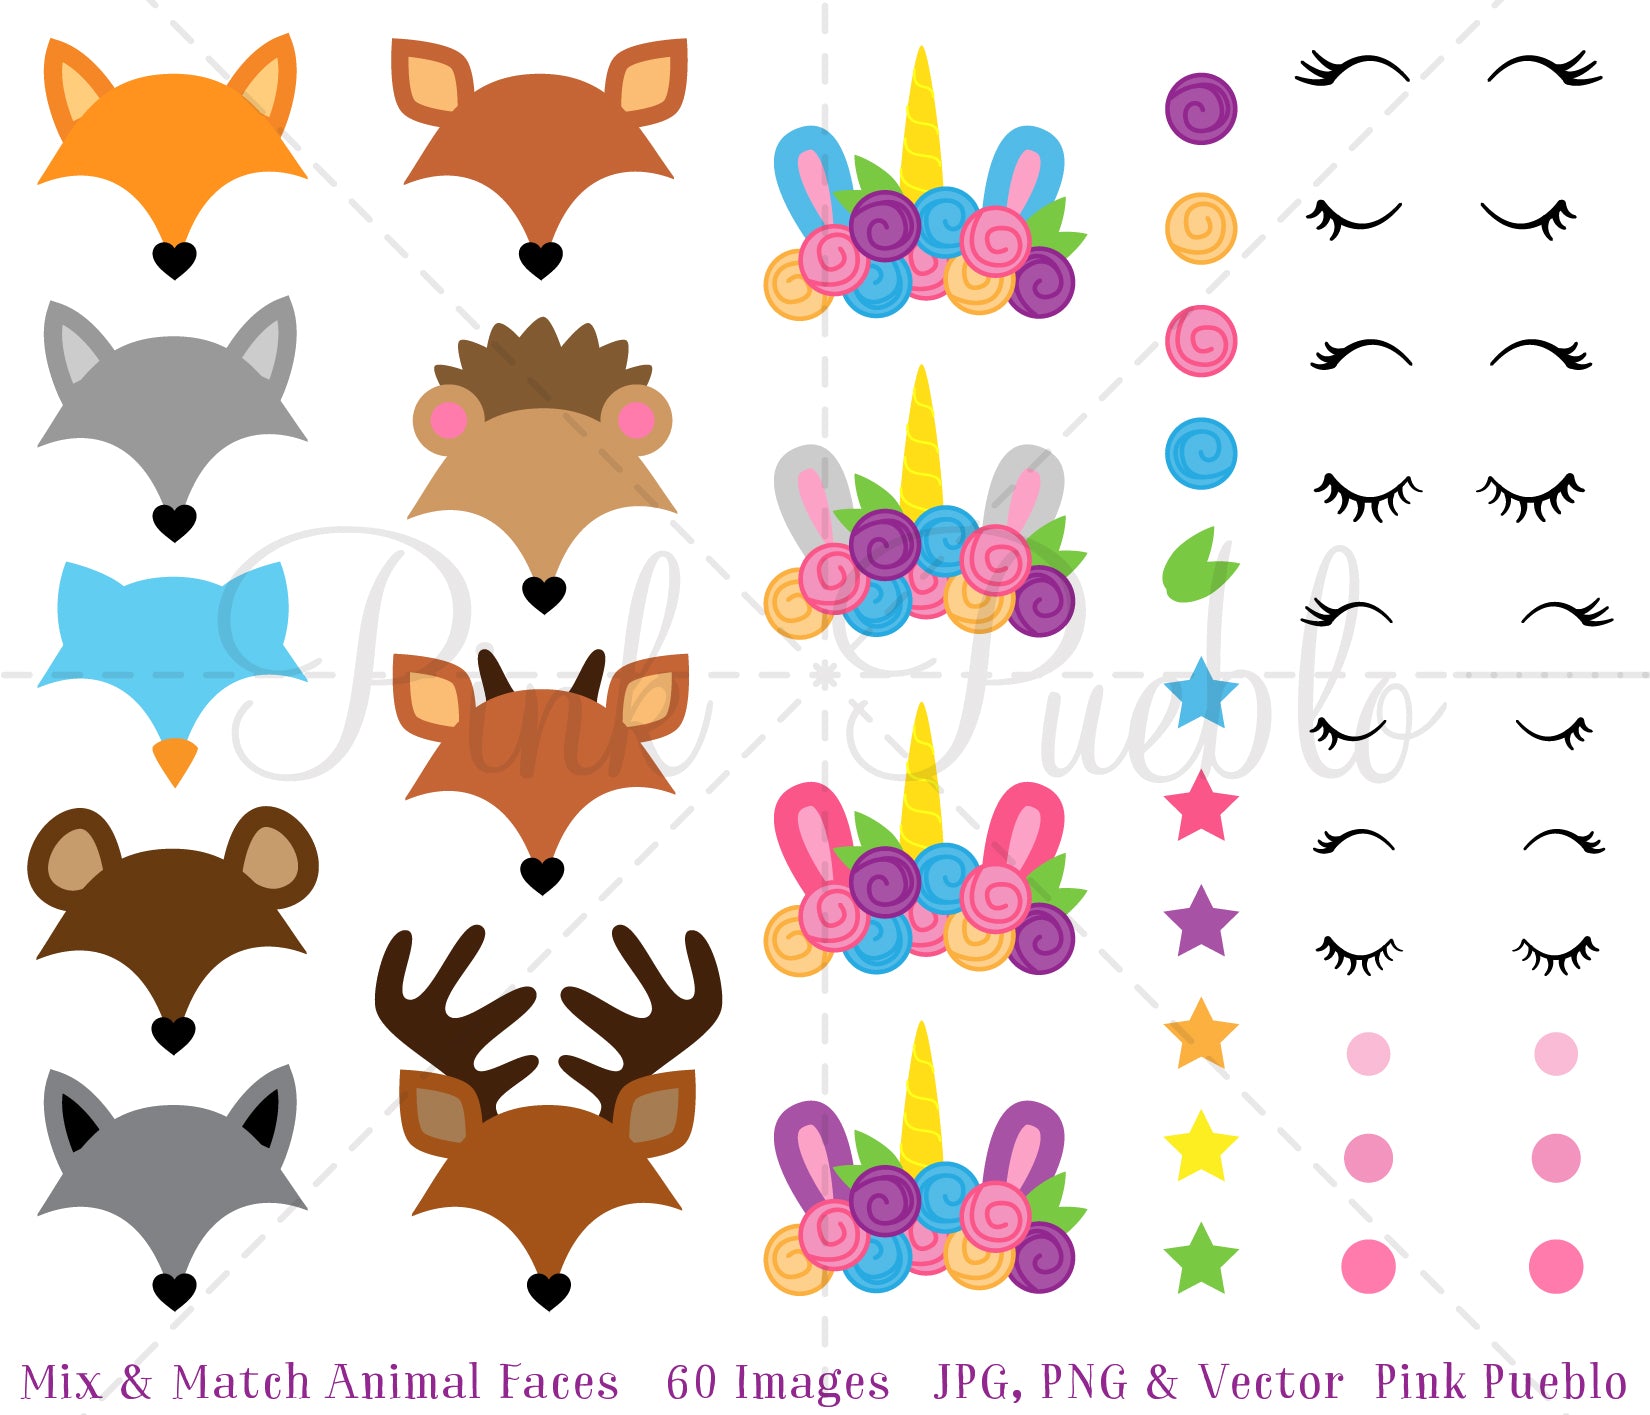 animal faces clipart